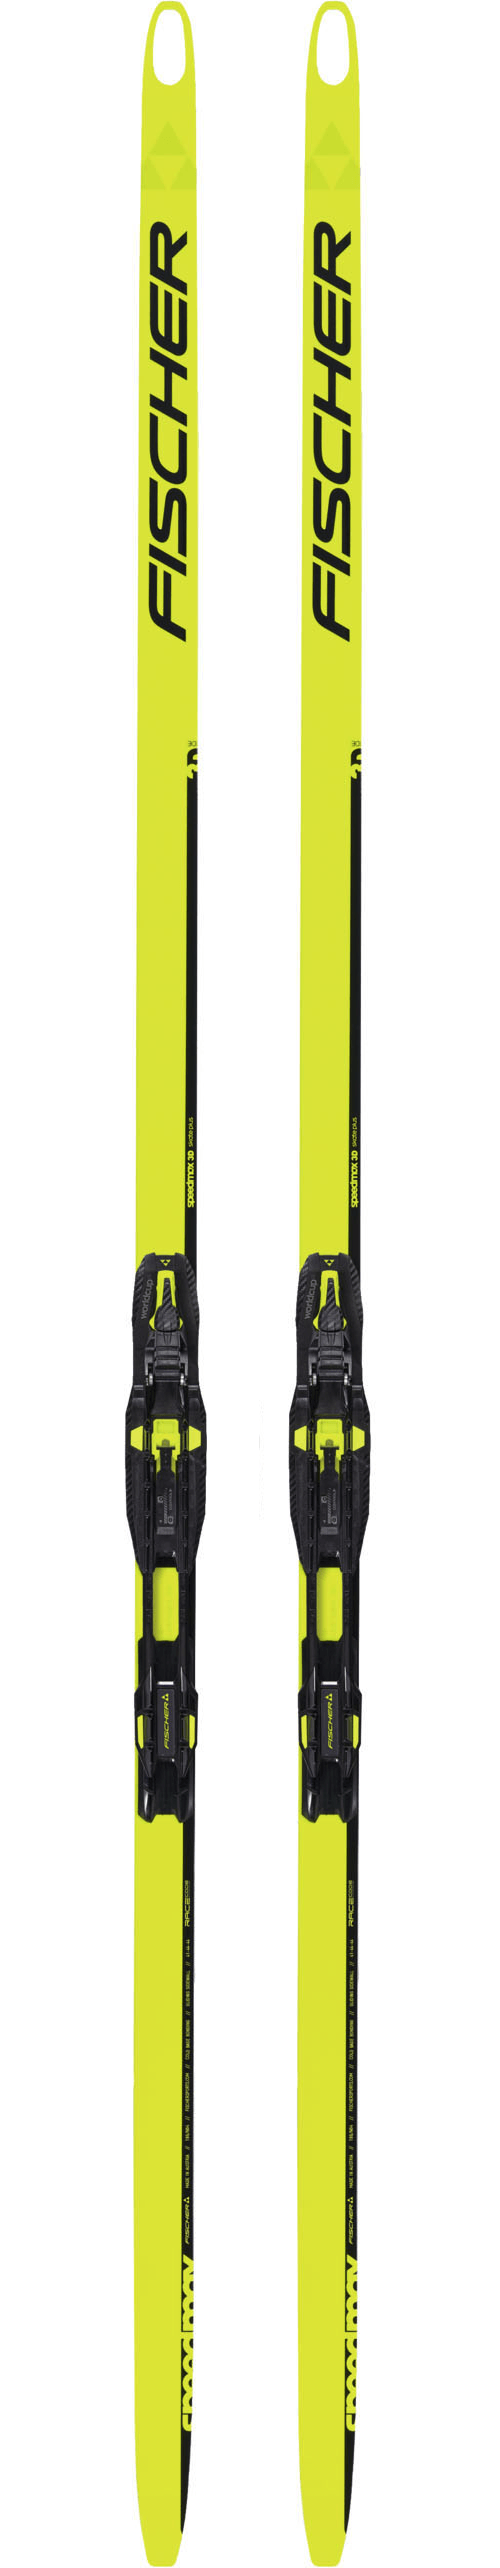 Buy Fischer Cross-Country Ski Collection at Gear West. Buy Online 